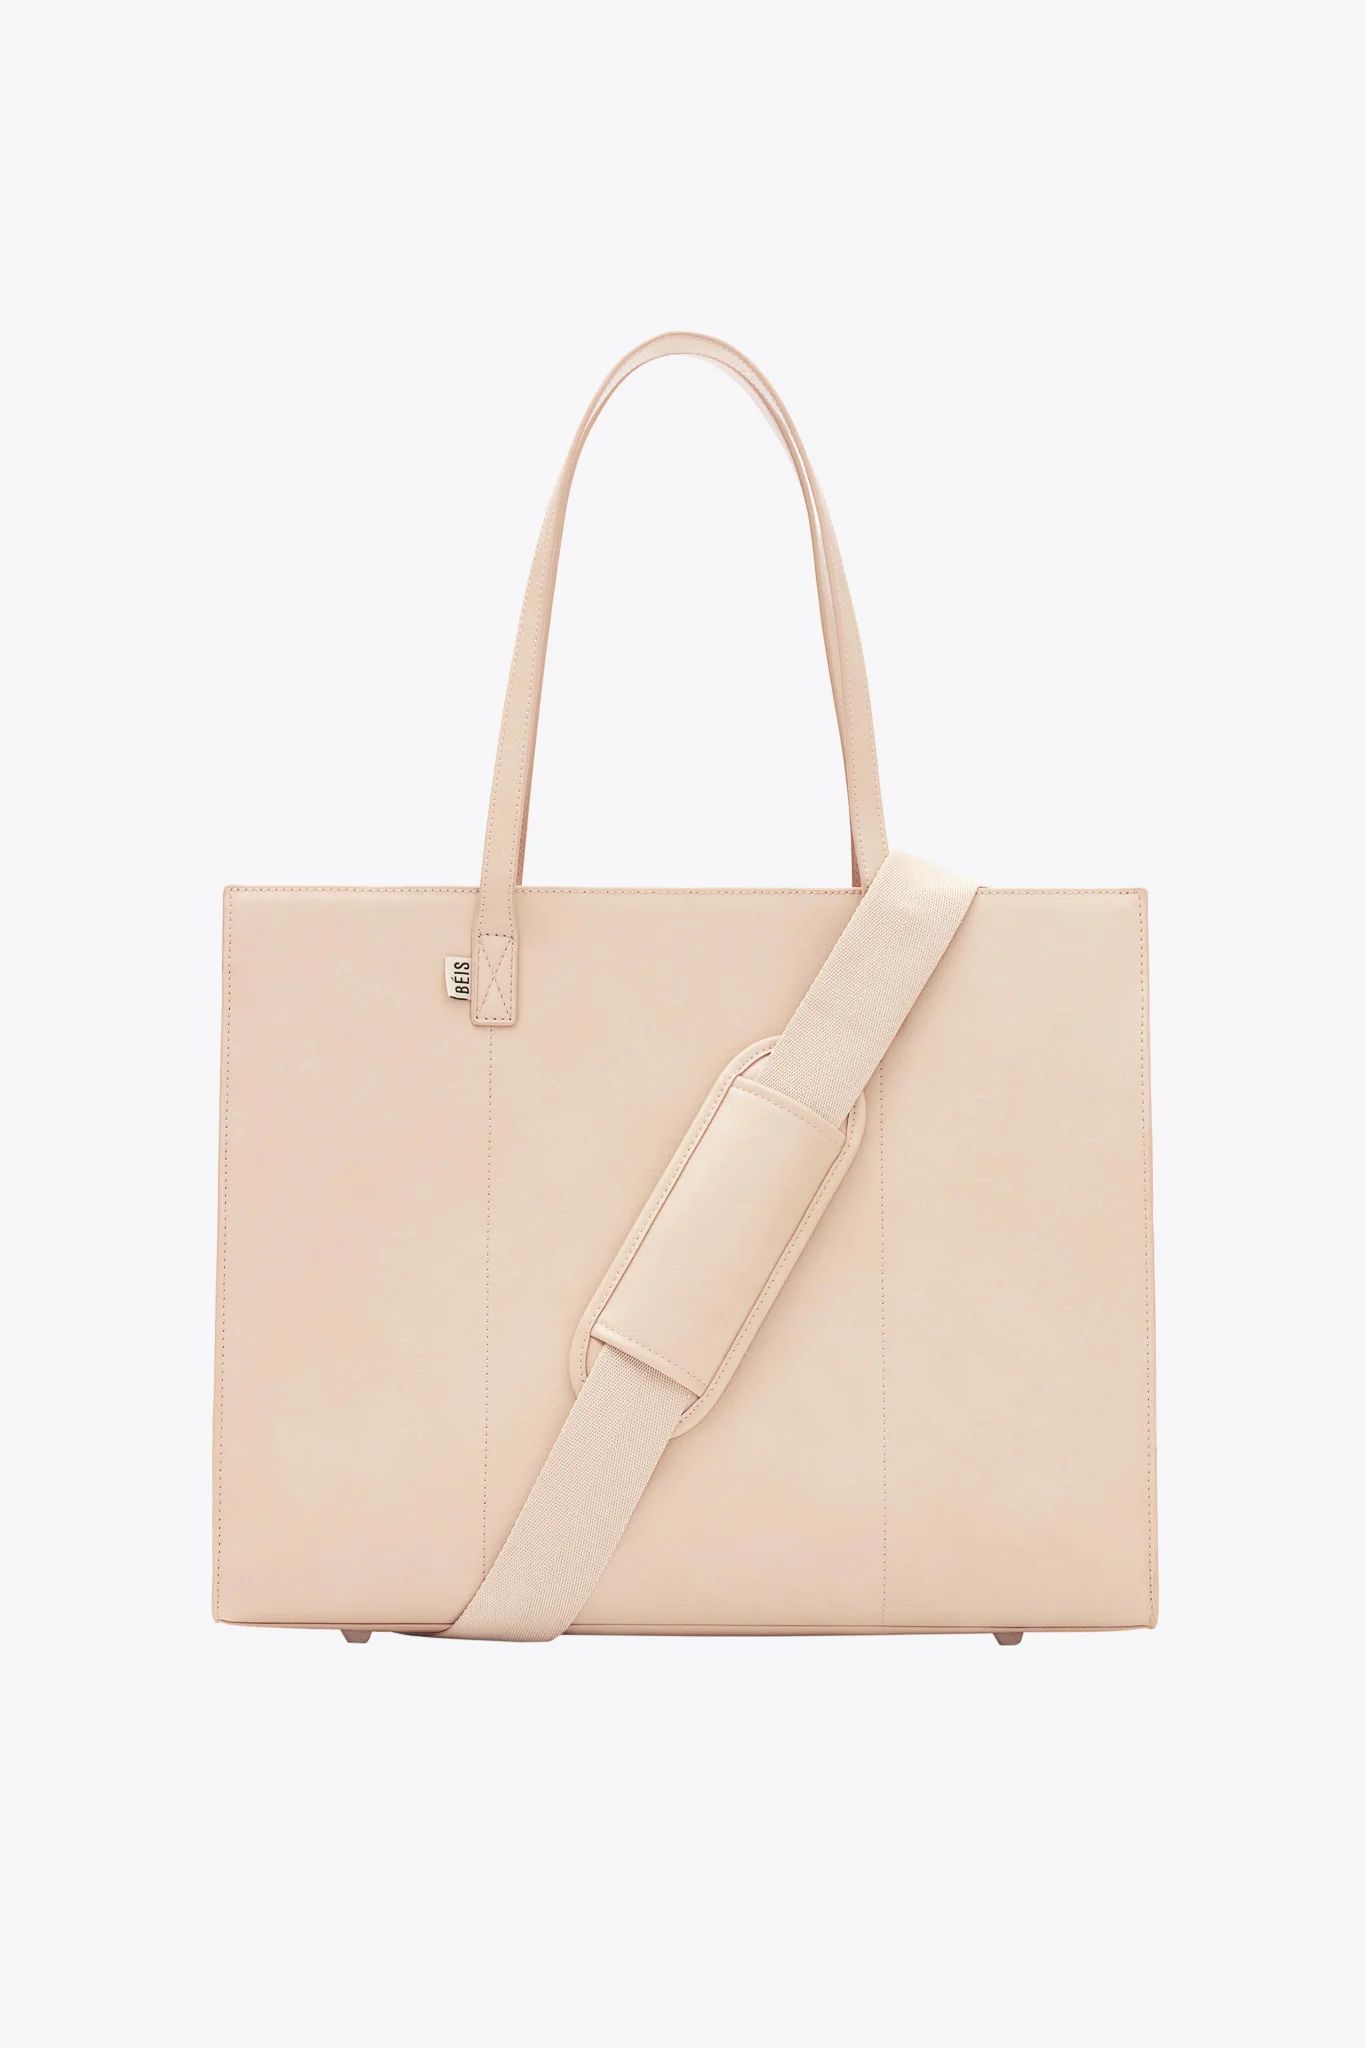 The Large Work Tote in Beige | BÉIS Travel